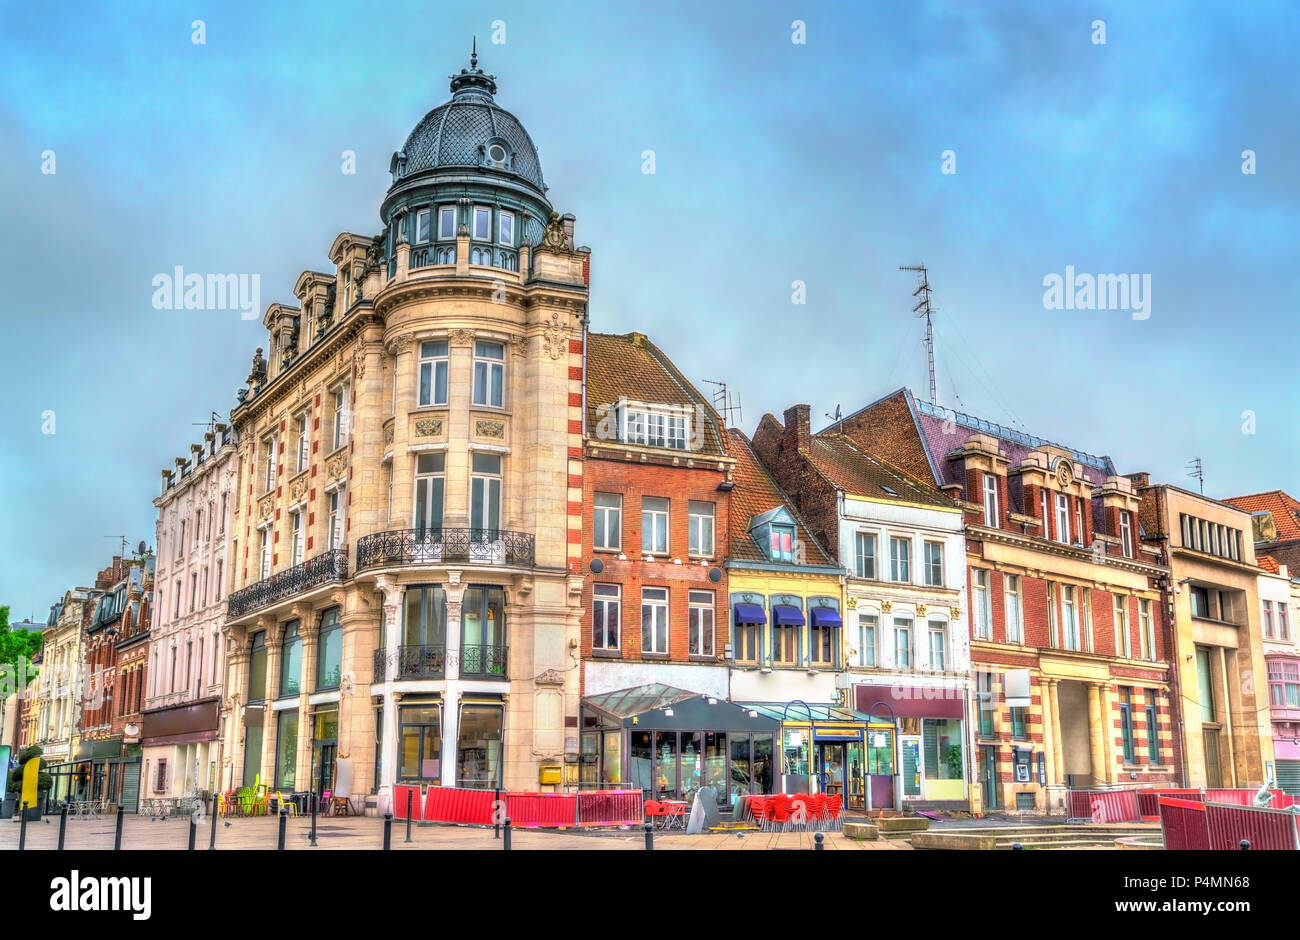 Buildings in Tourcoing, a town near Lille in Northern France Stock Photo